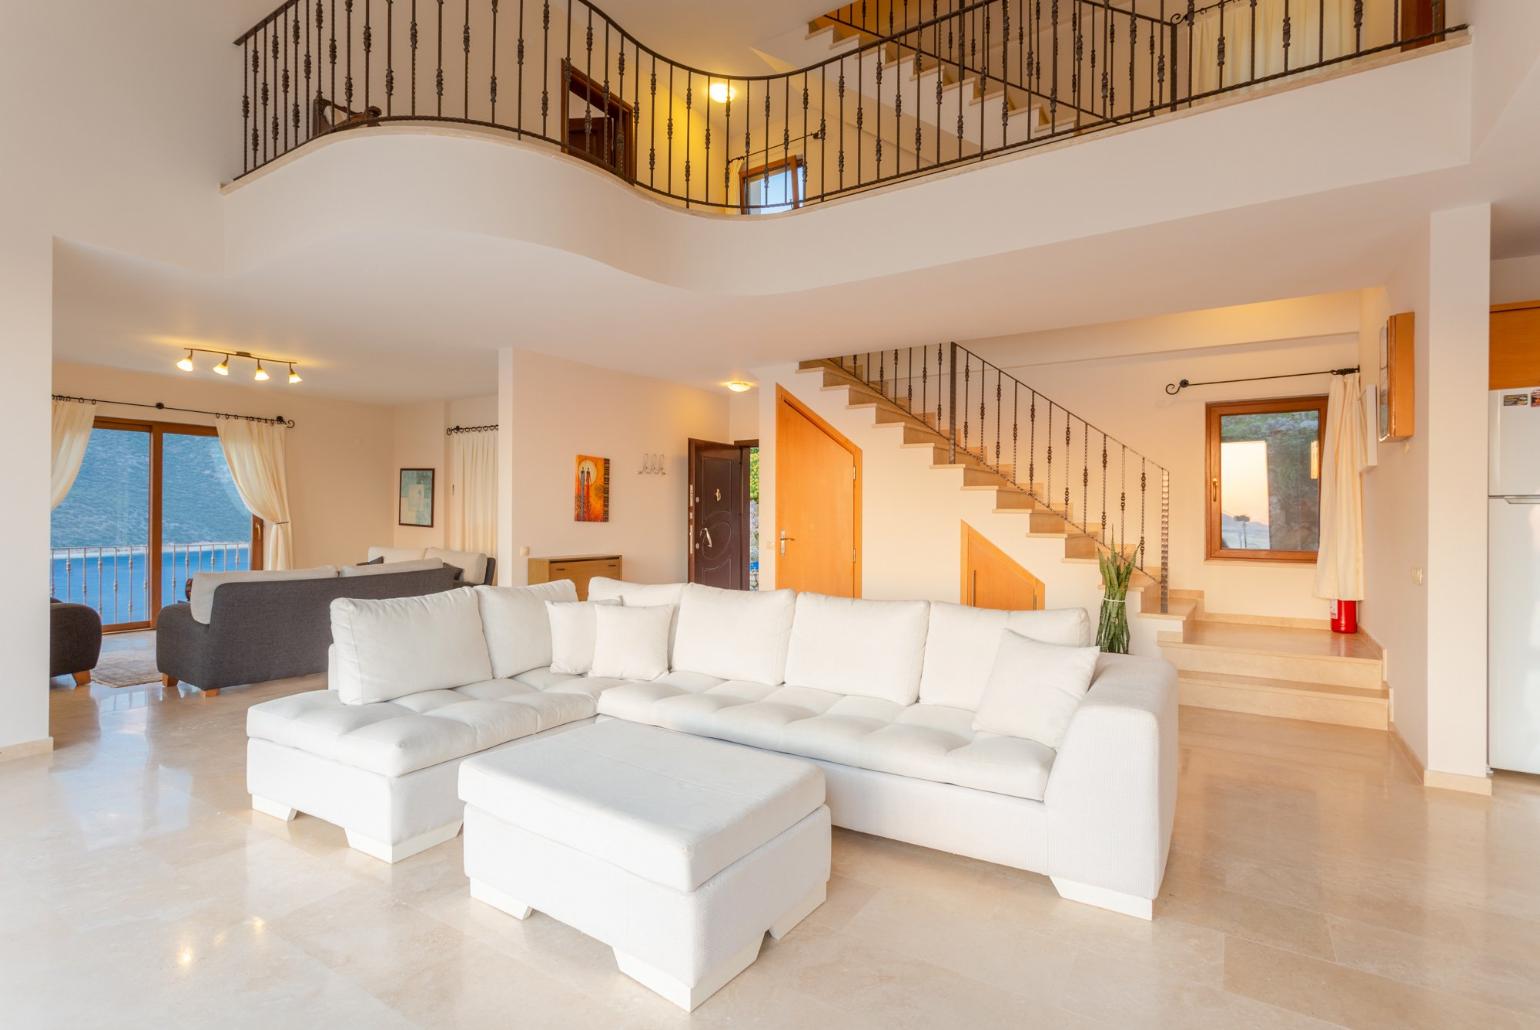 Open-plan living room with sofas, dining area, kitchen, A/C, WiFi internet, satellite TV, DVD player, and terrace access with panoramic sea views